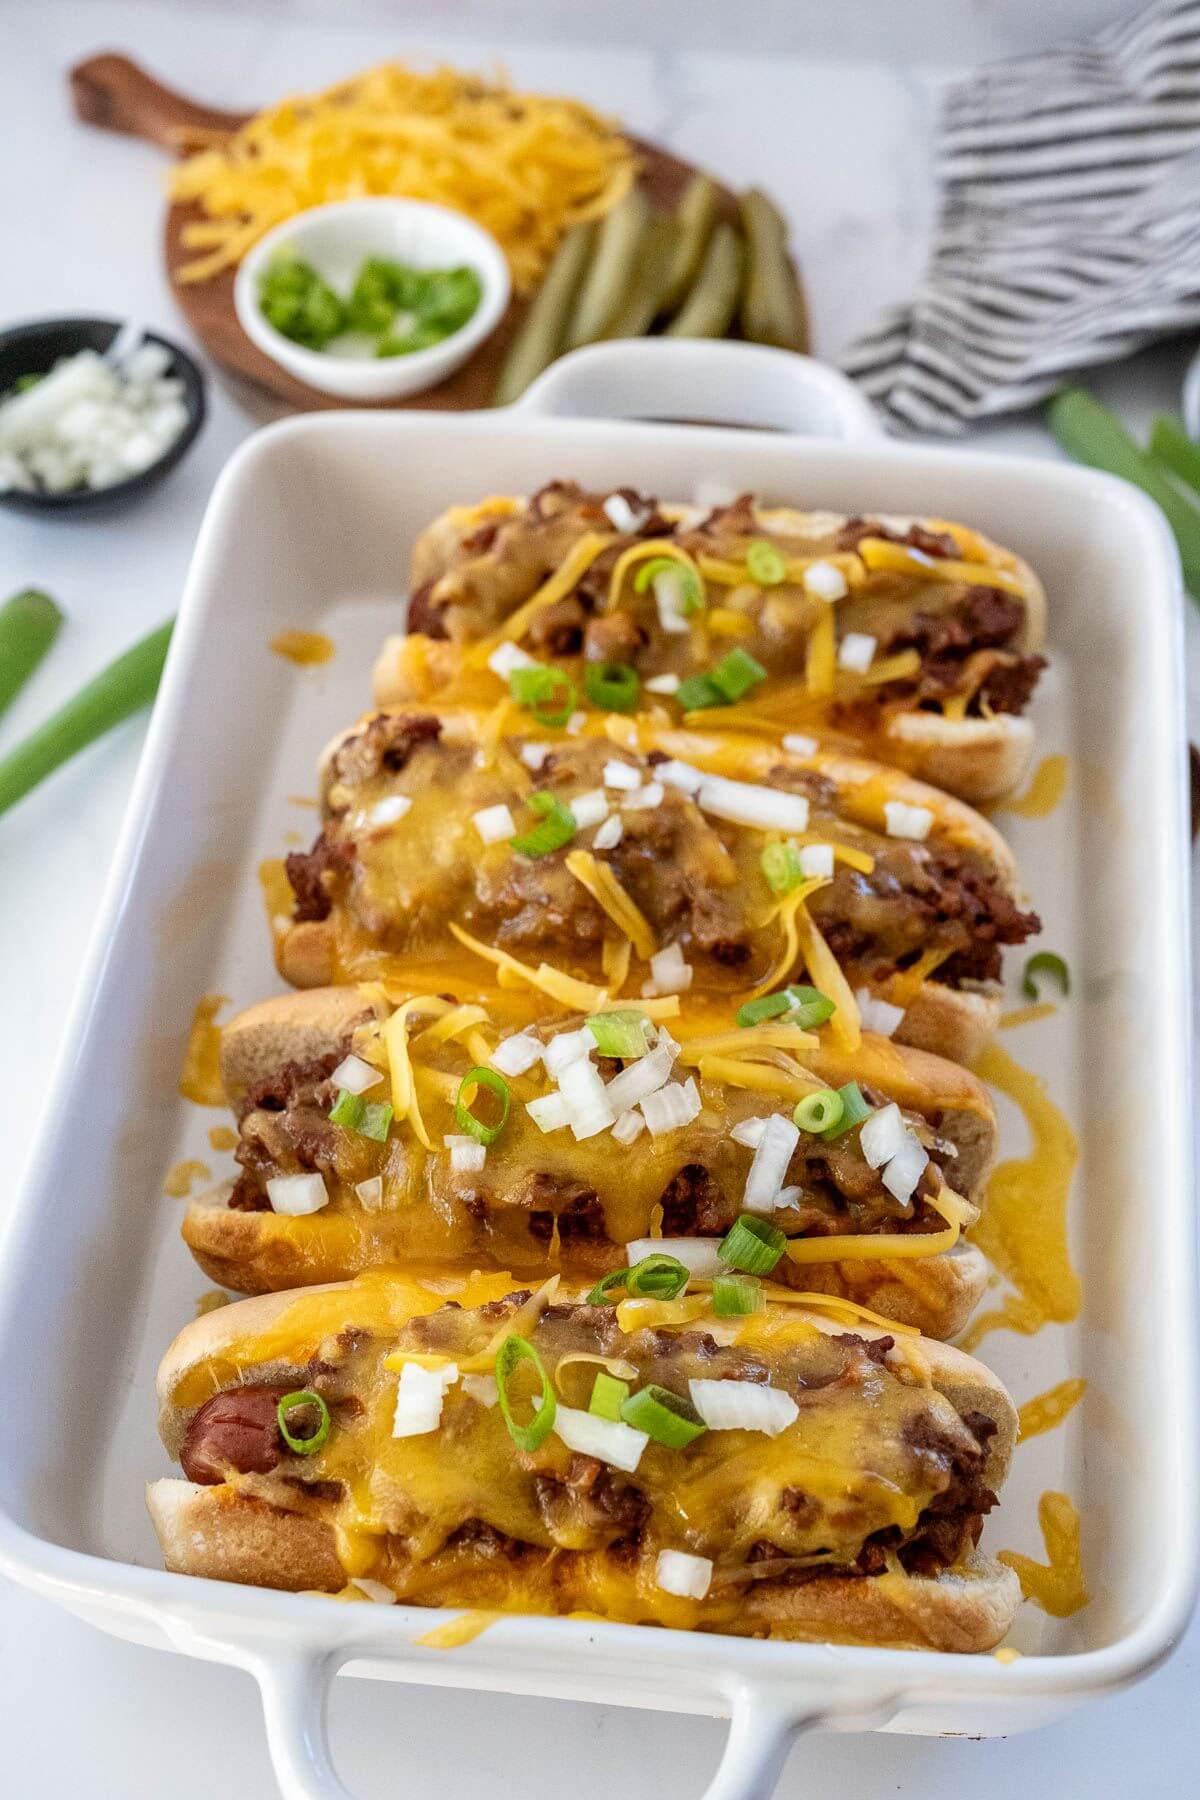 A baking dish full of chili dogs with cheese, onions, and green onions is next to other toppings.